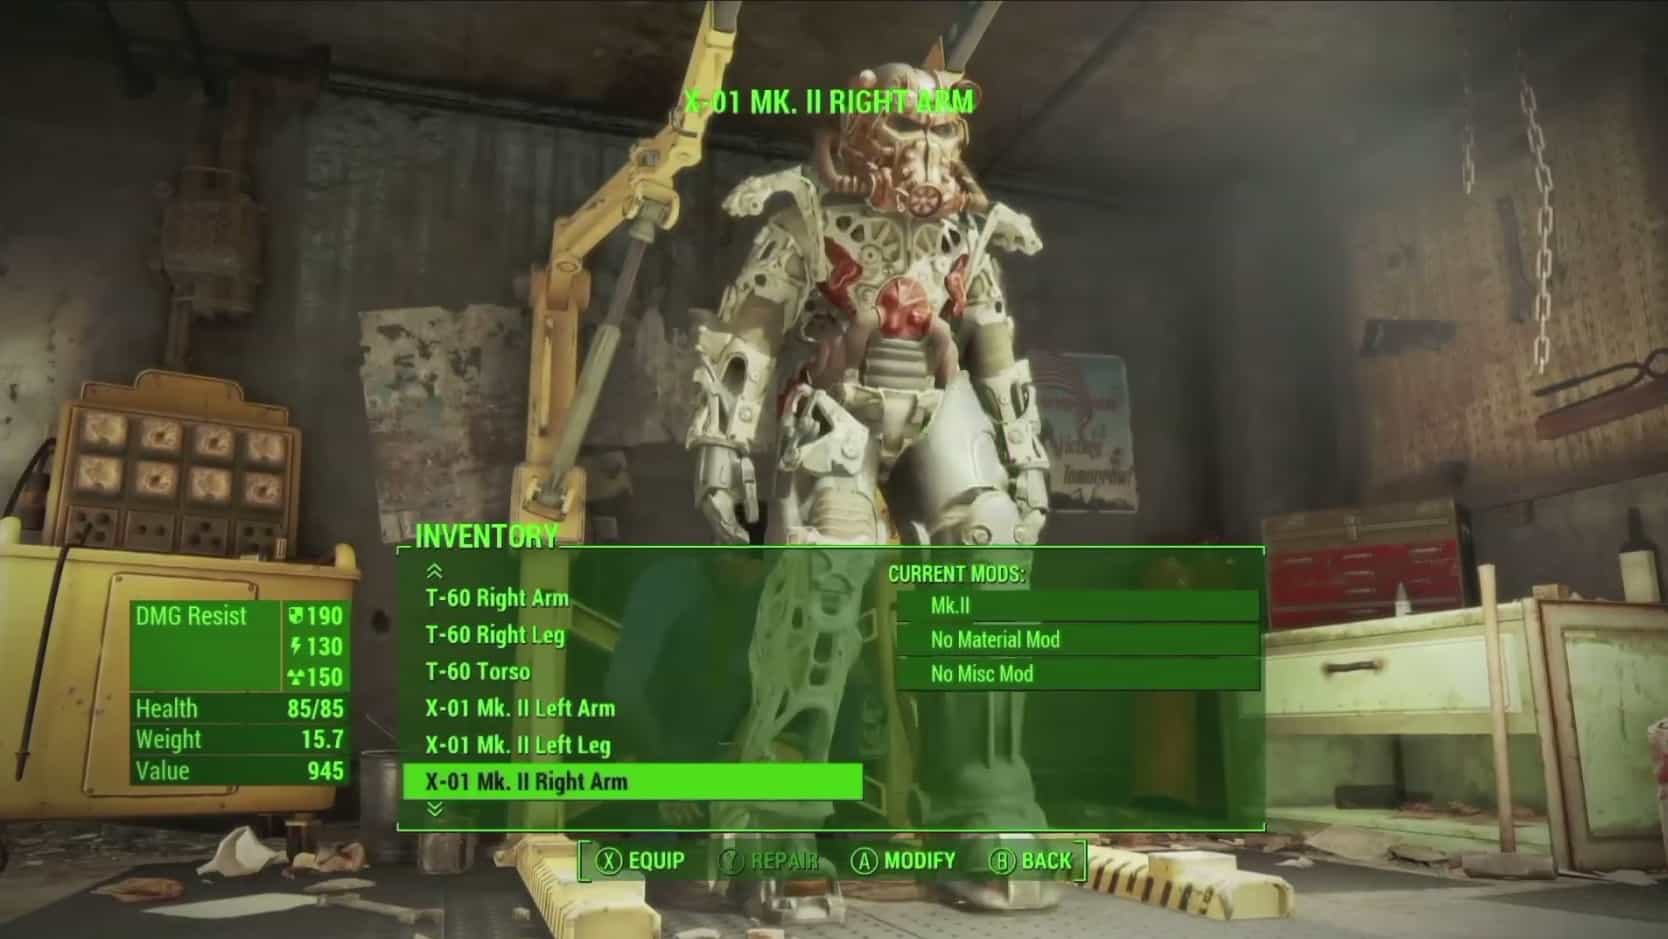 Fallout 4 Armor Crafting Iron Man Power Suit Xbox One PS4 PC Gameplay Screenshot